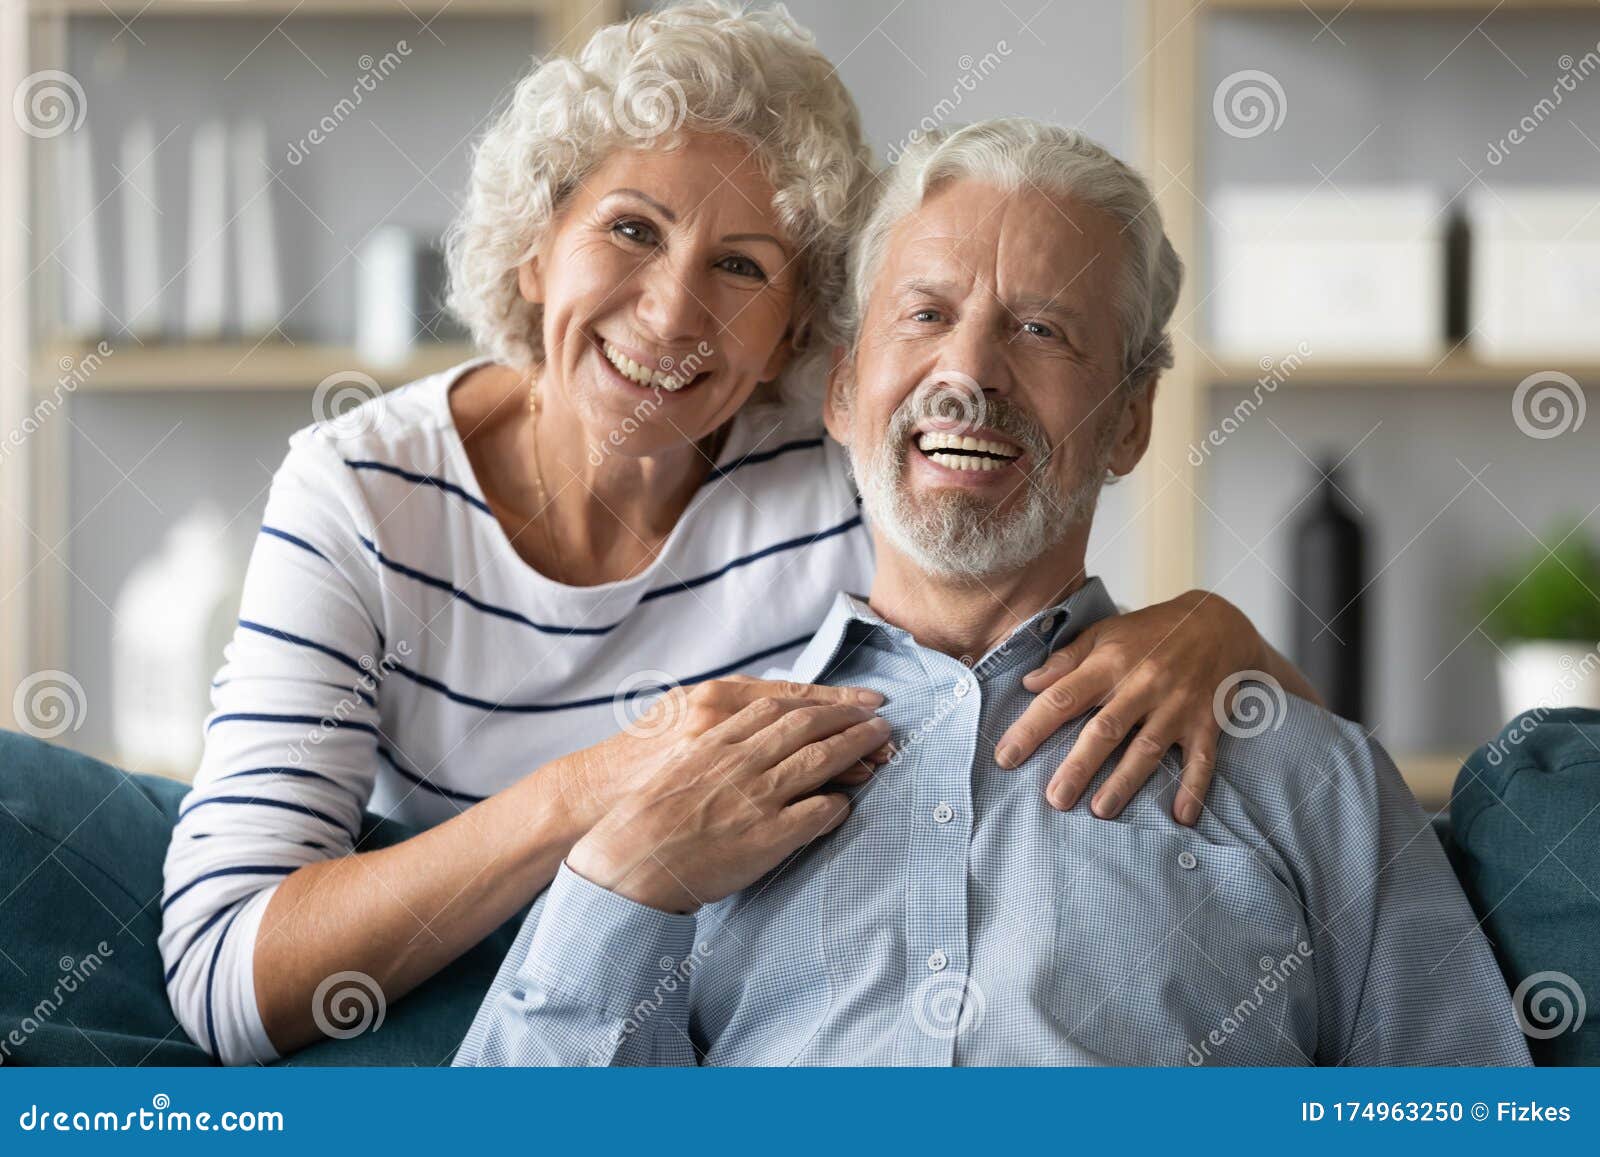 Portrait Of Happy Elderly Couple Relax At Home Stock Photo Image Of